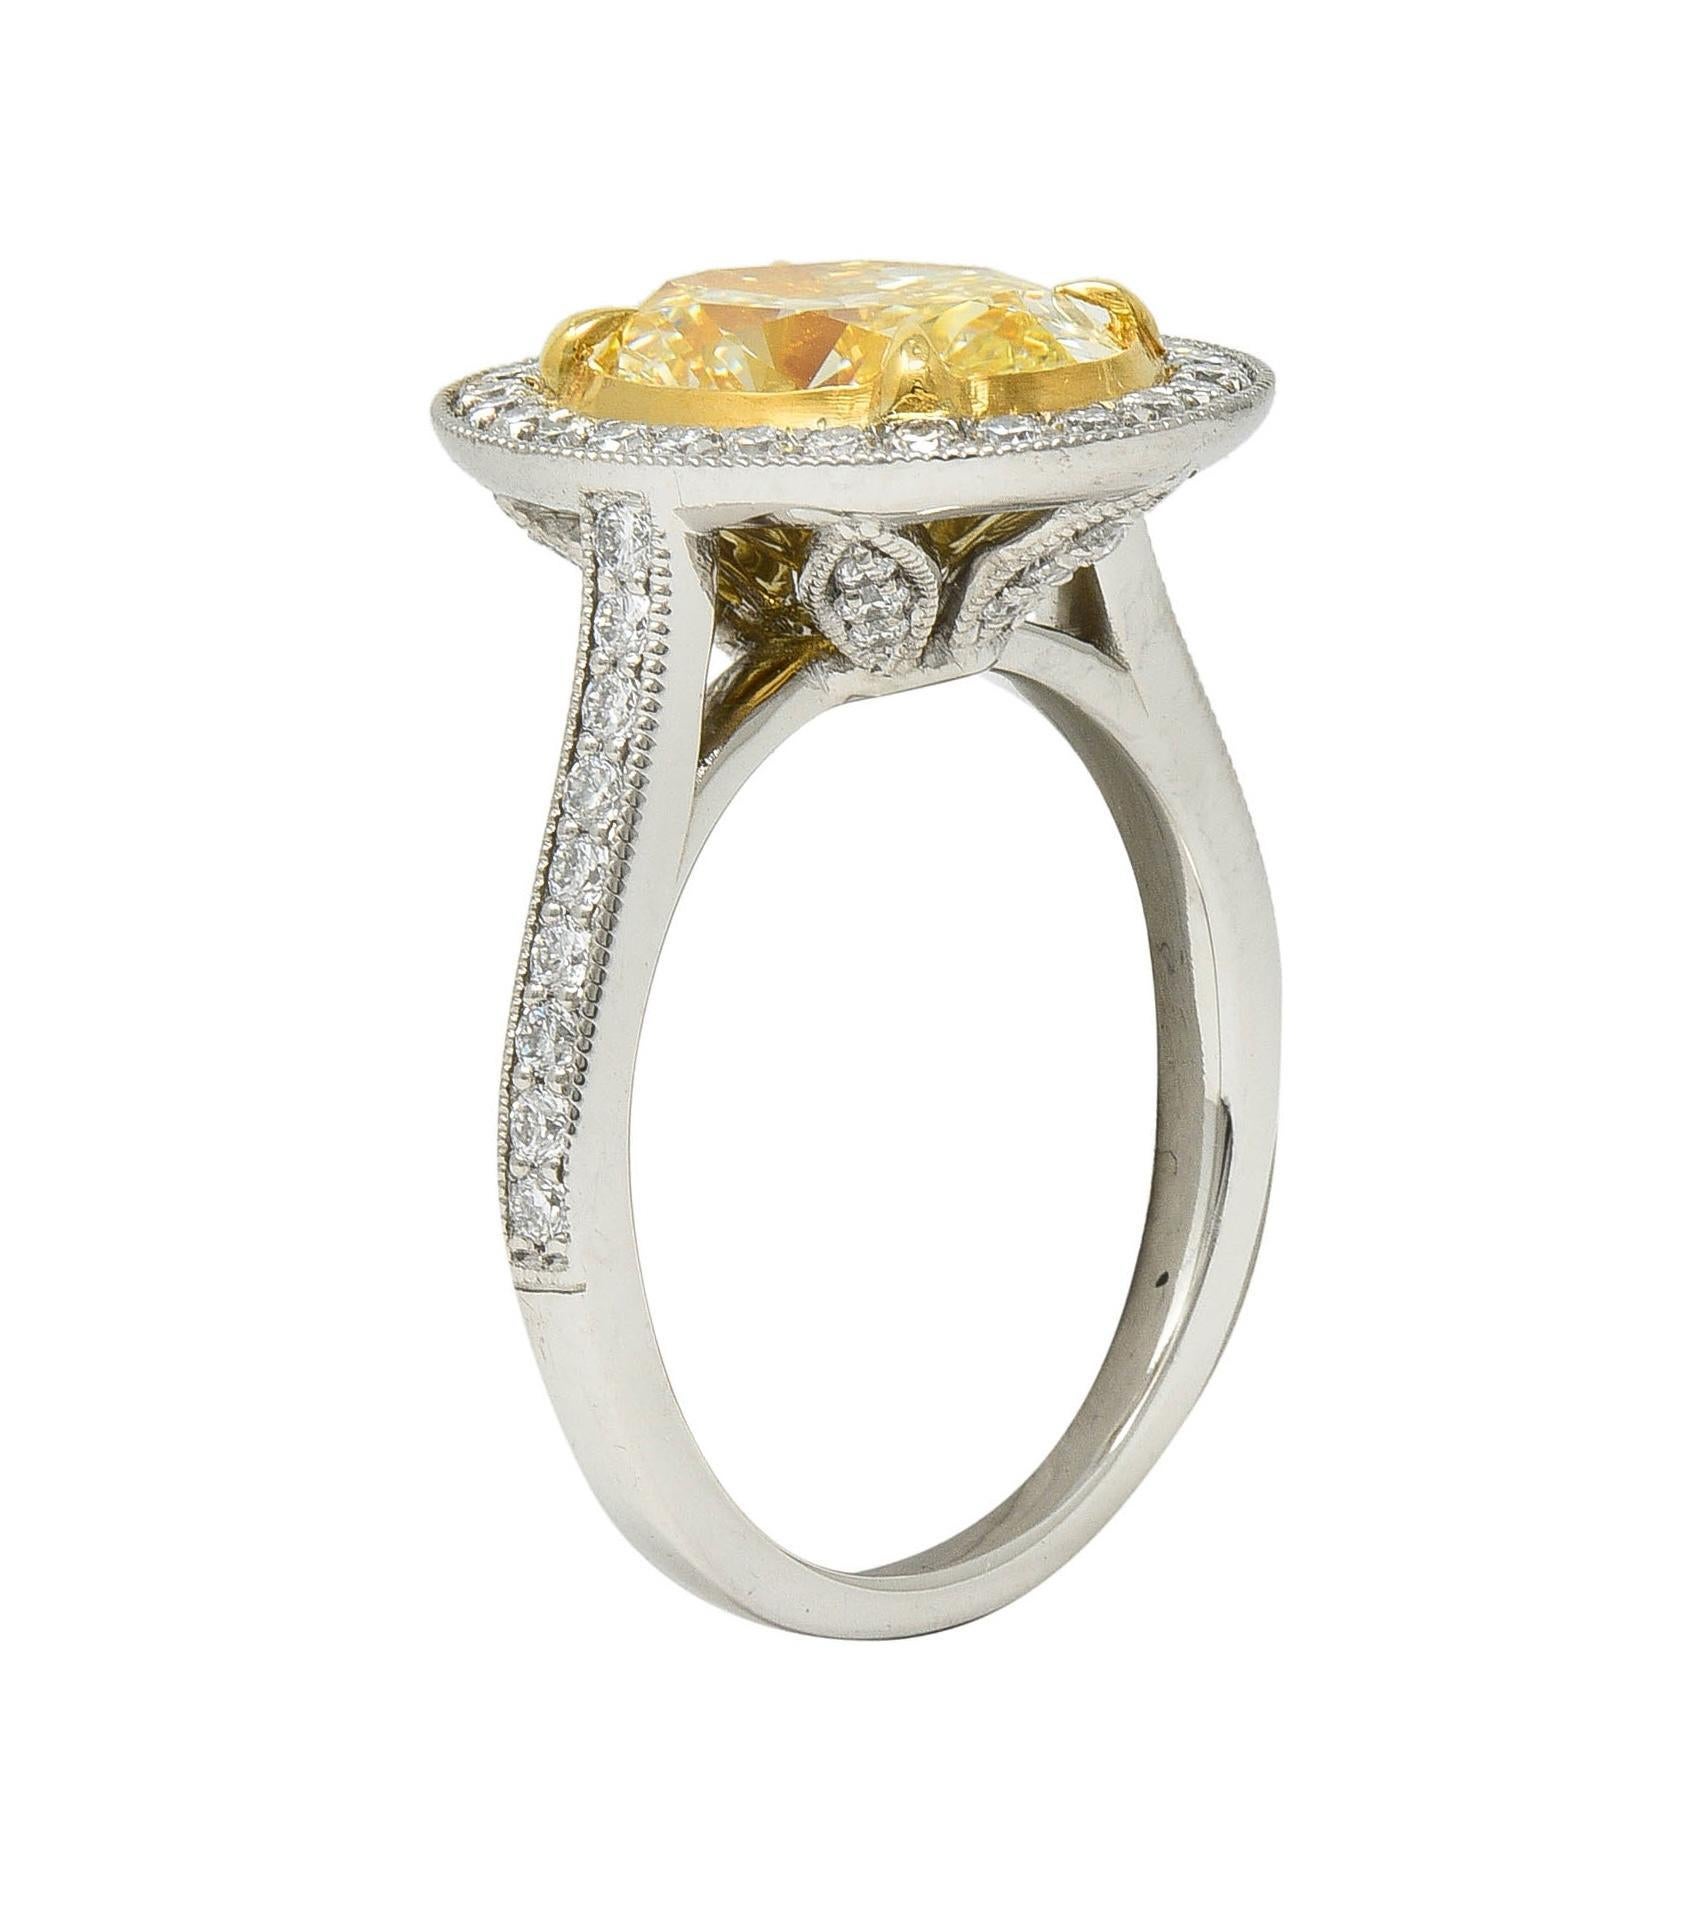 Contemporary 2.72 CTW Yellow Diamond Platinum 18 Karat Gold Halo Ring GIA In Excellent Condition For Sale In Philadelphia, PA